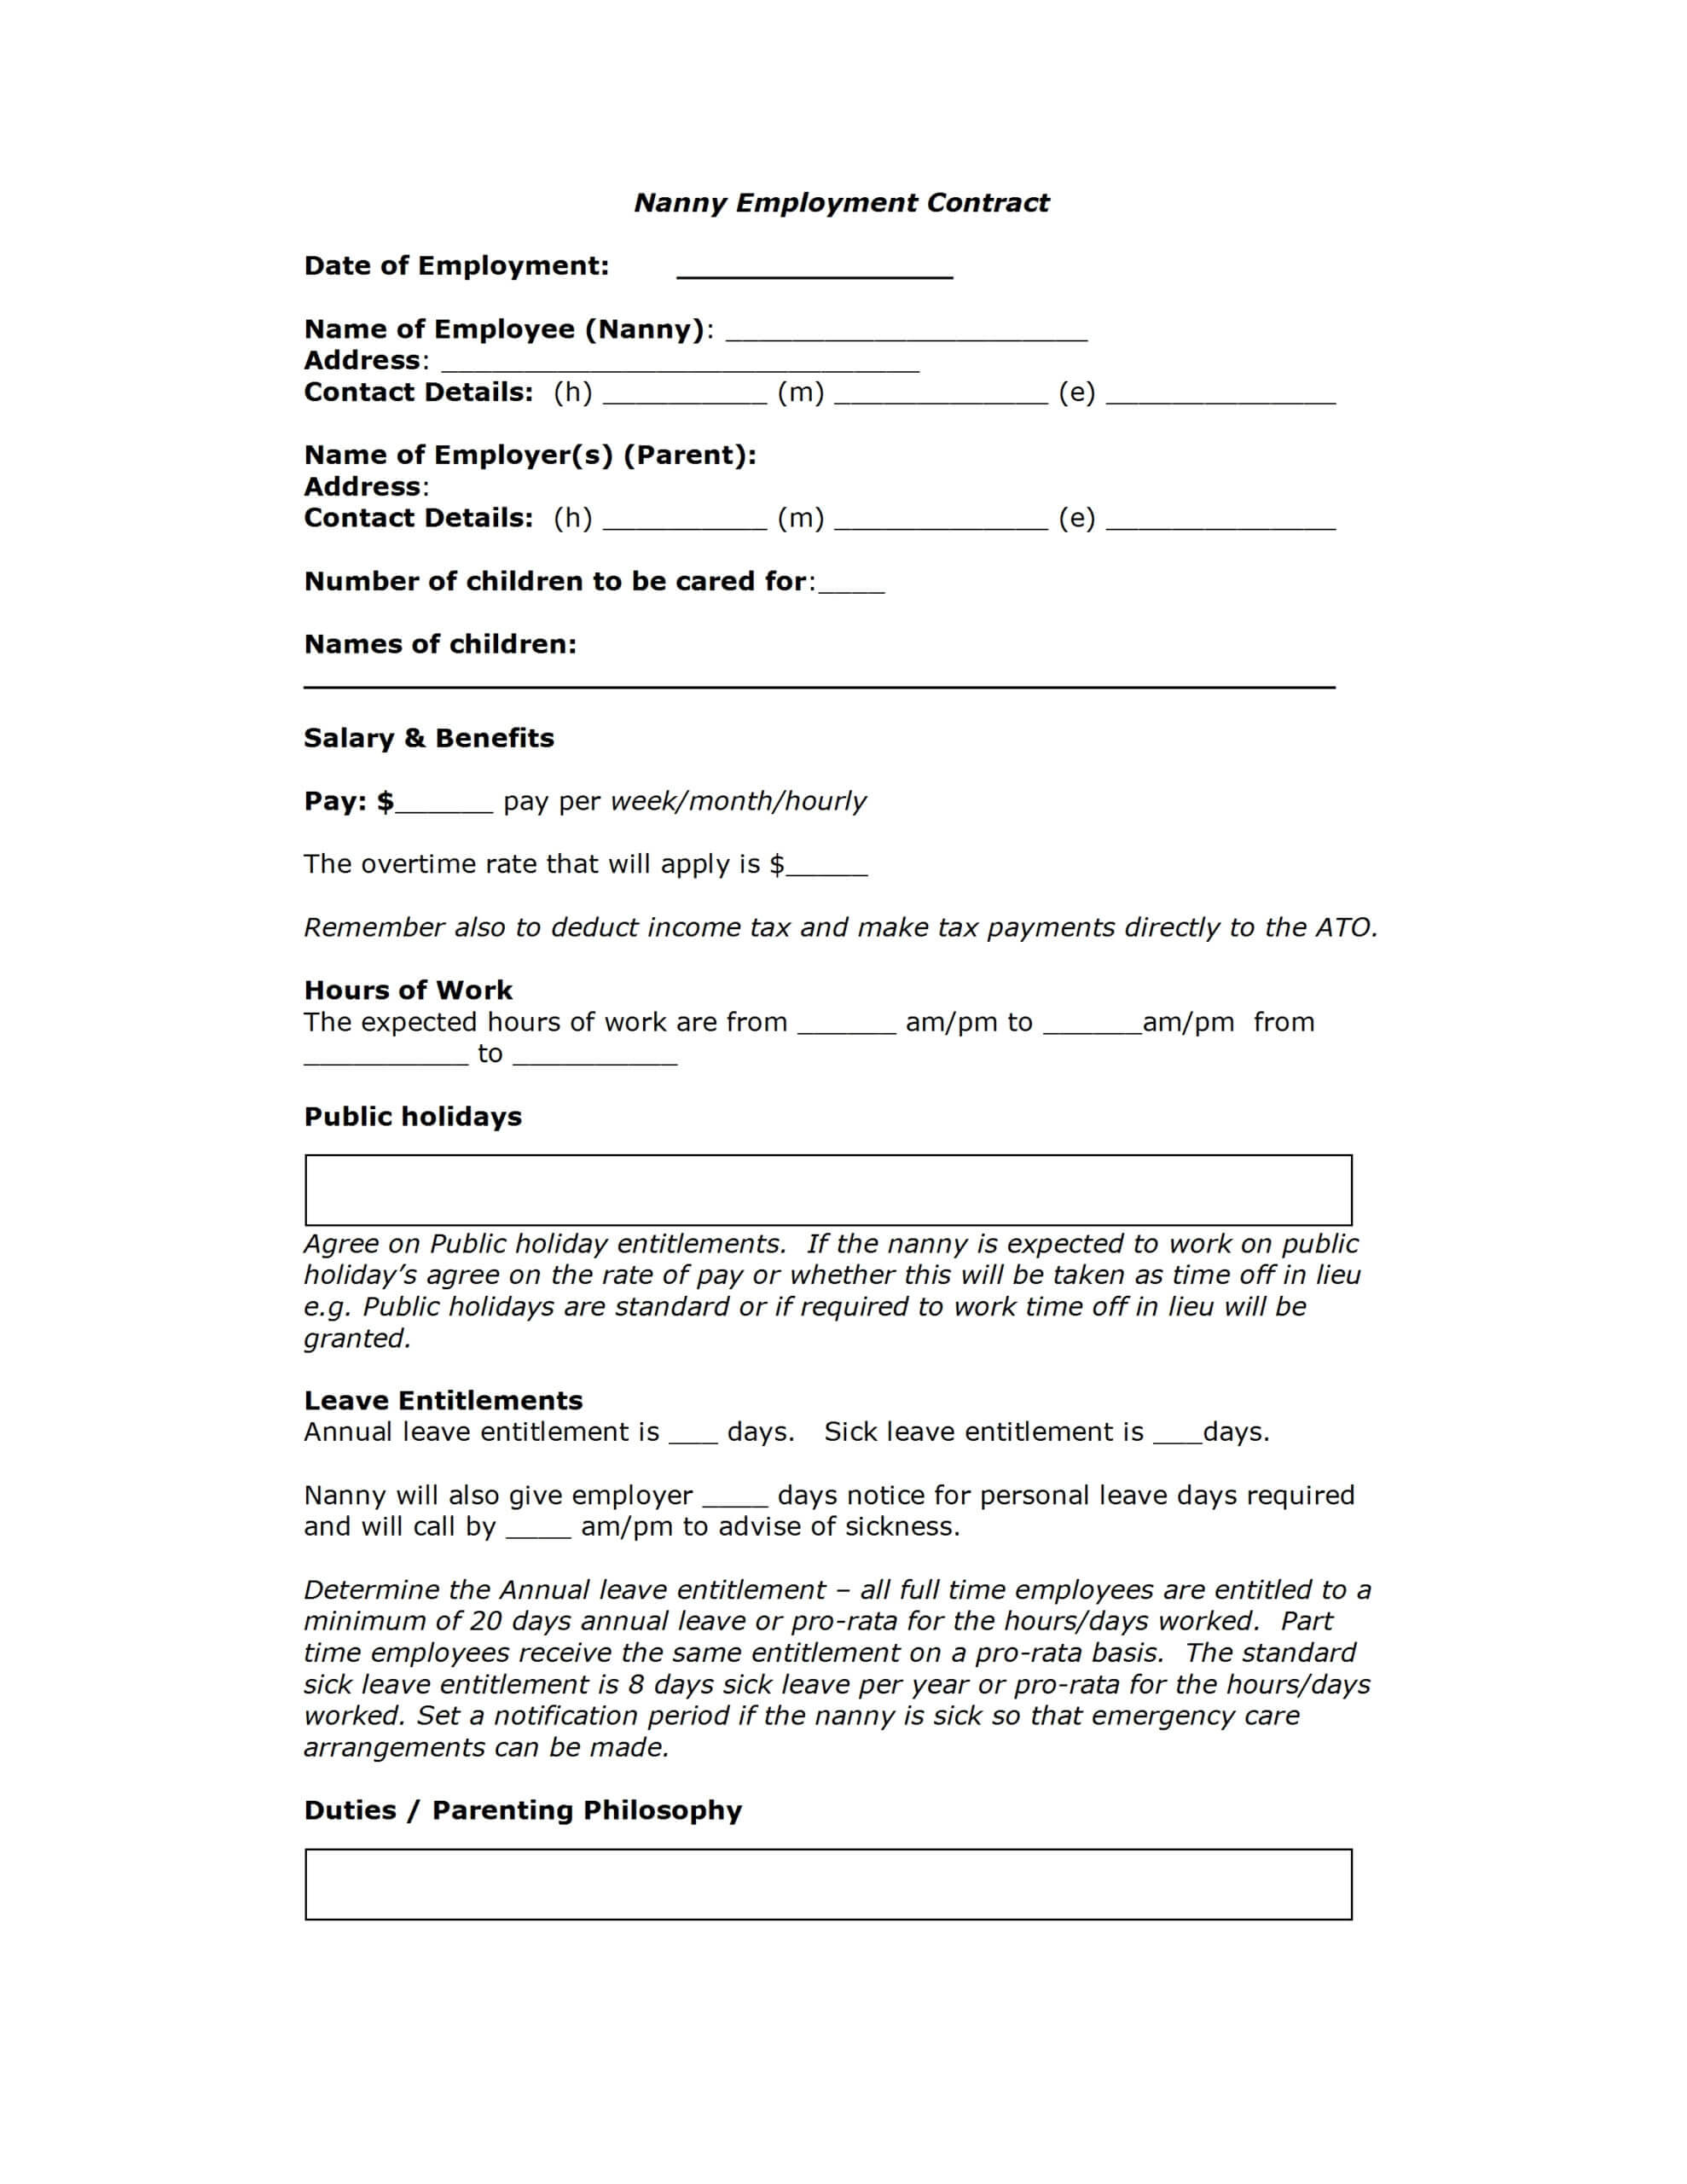 014 Nanny Employment Contract Template Ideas Microsoft Pertaining To Nanny Contract Template Word